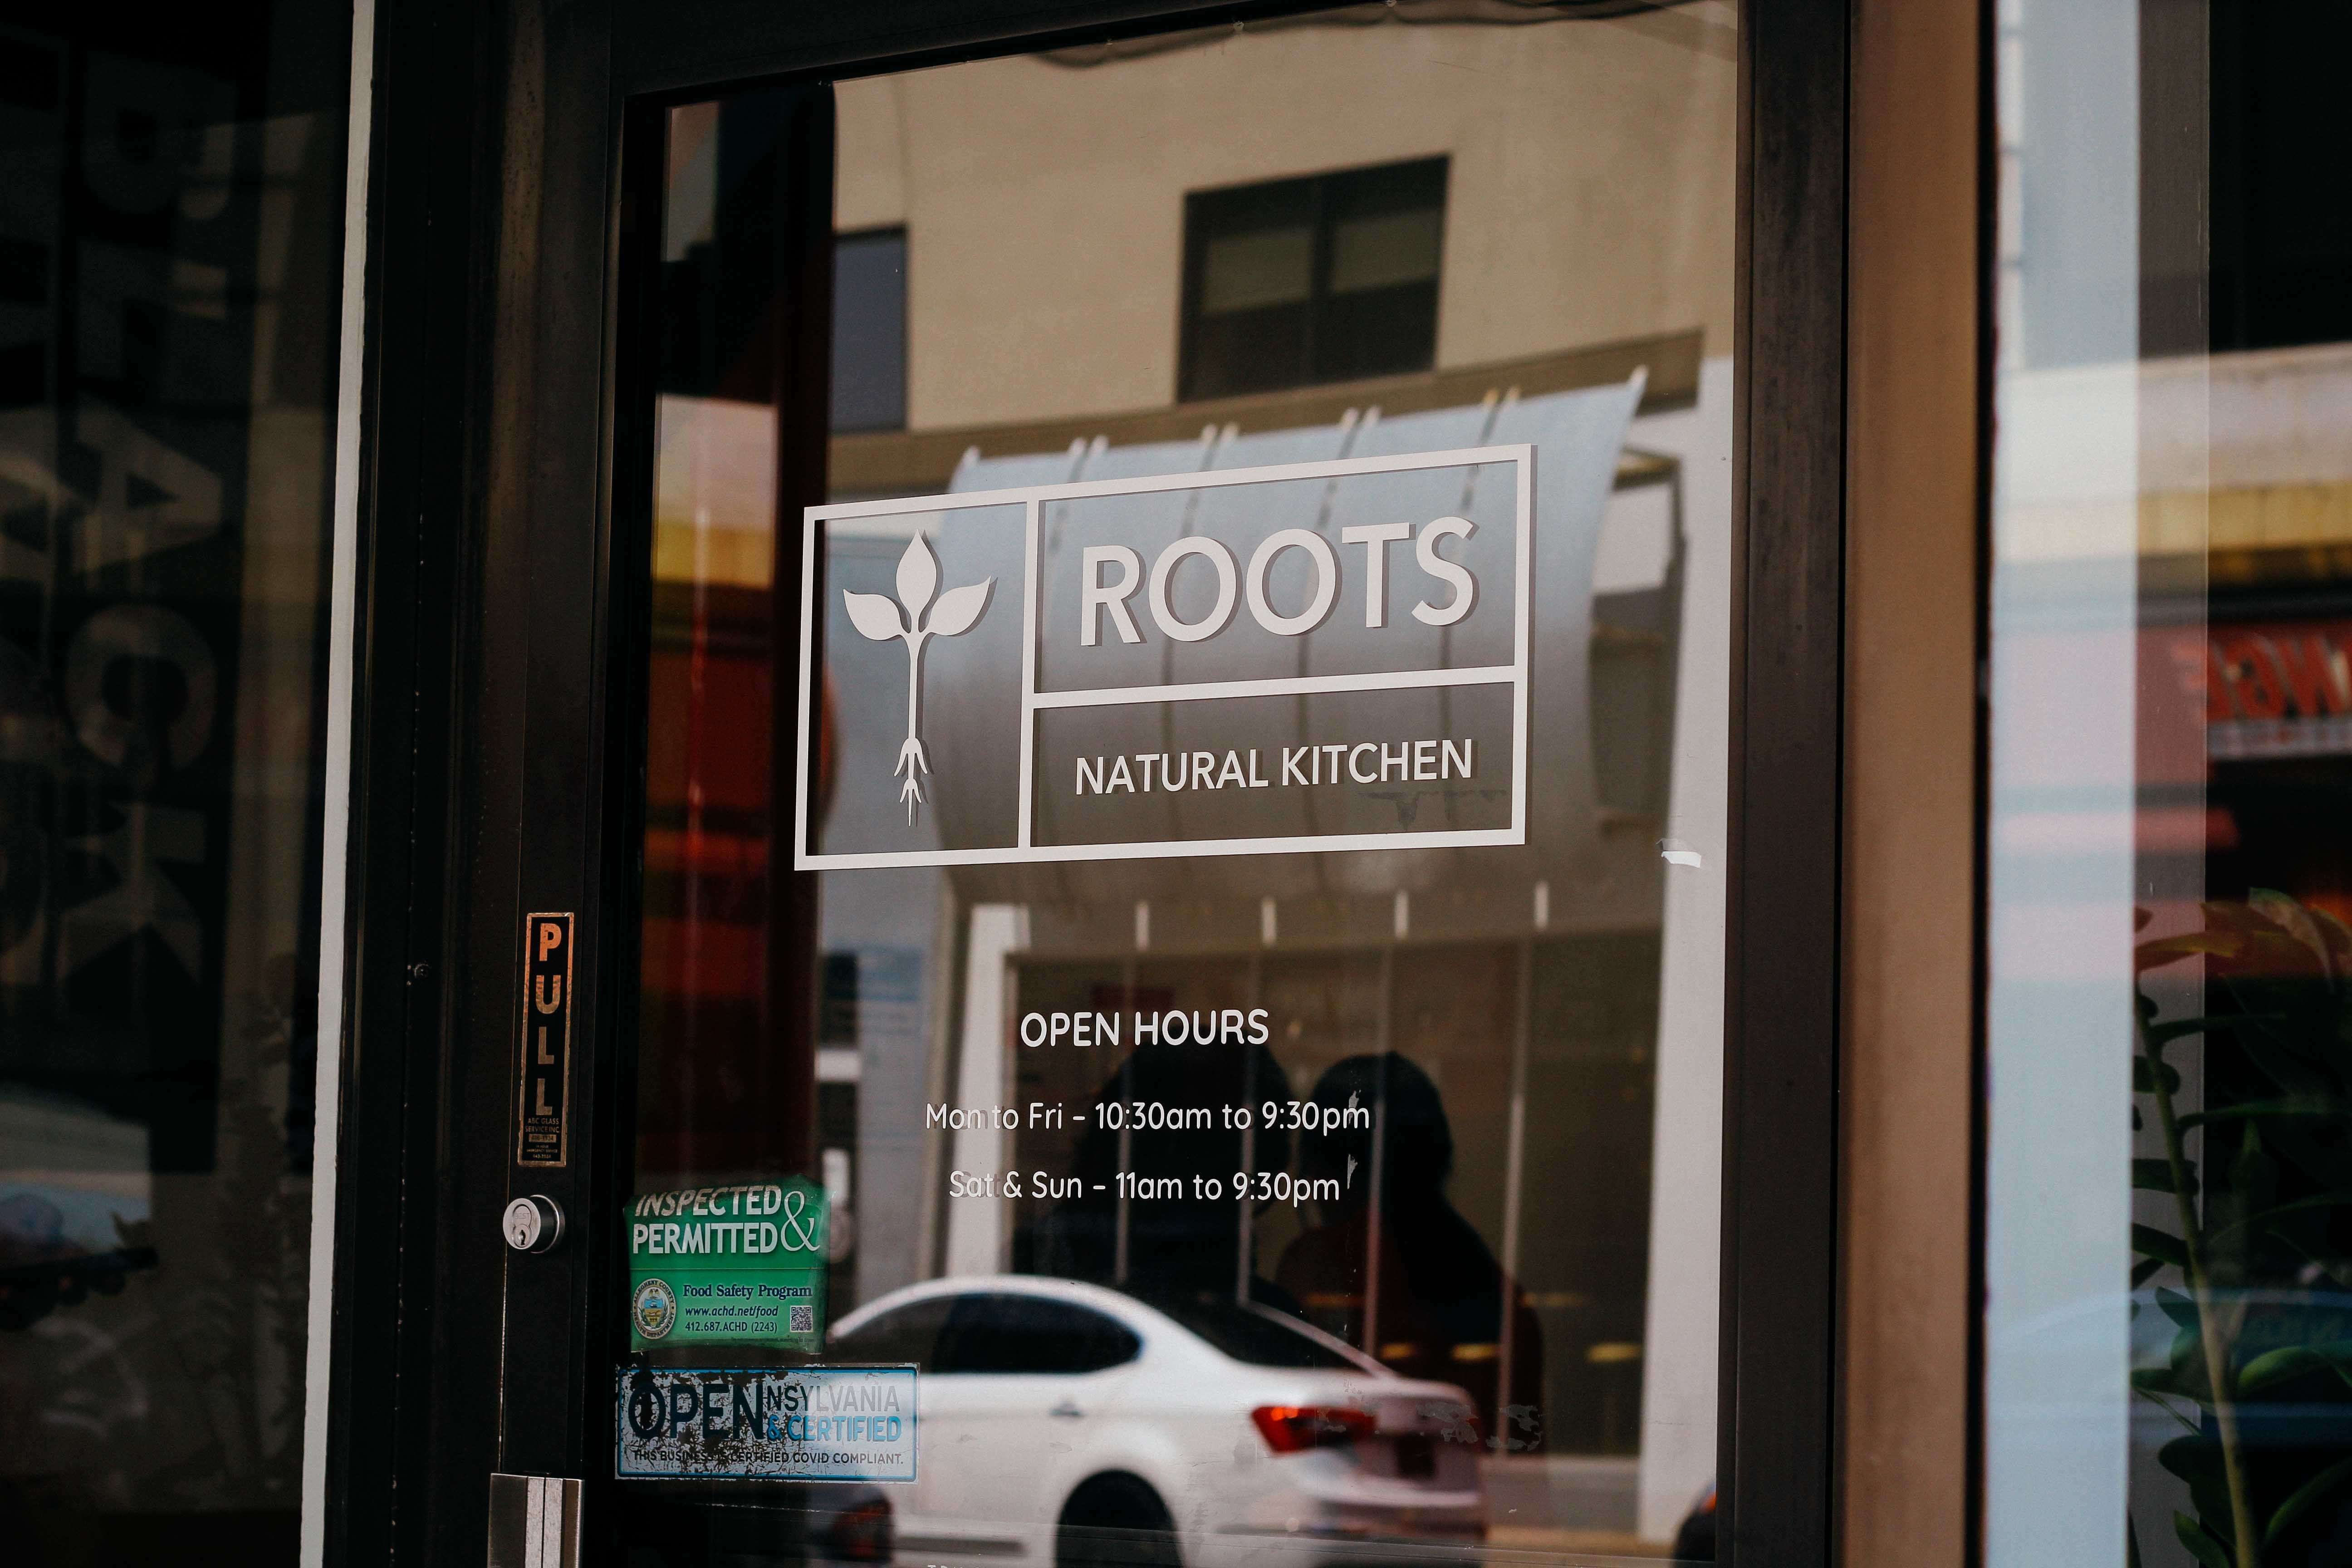 Outside of Roots